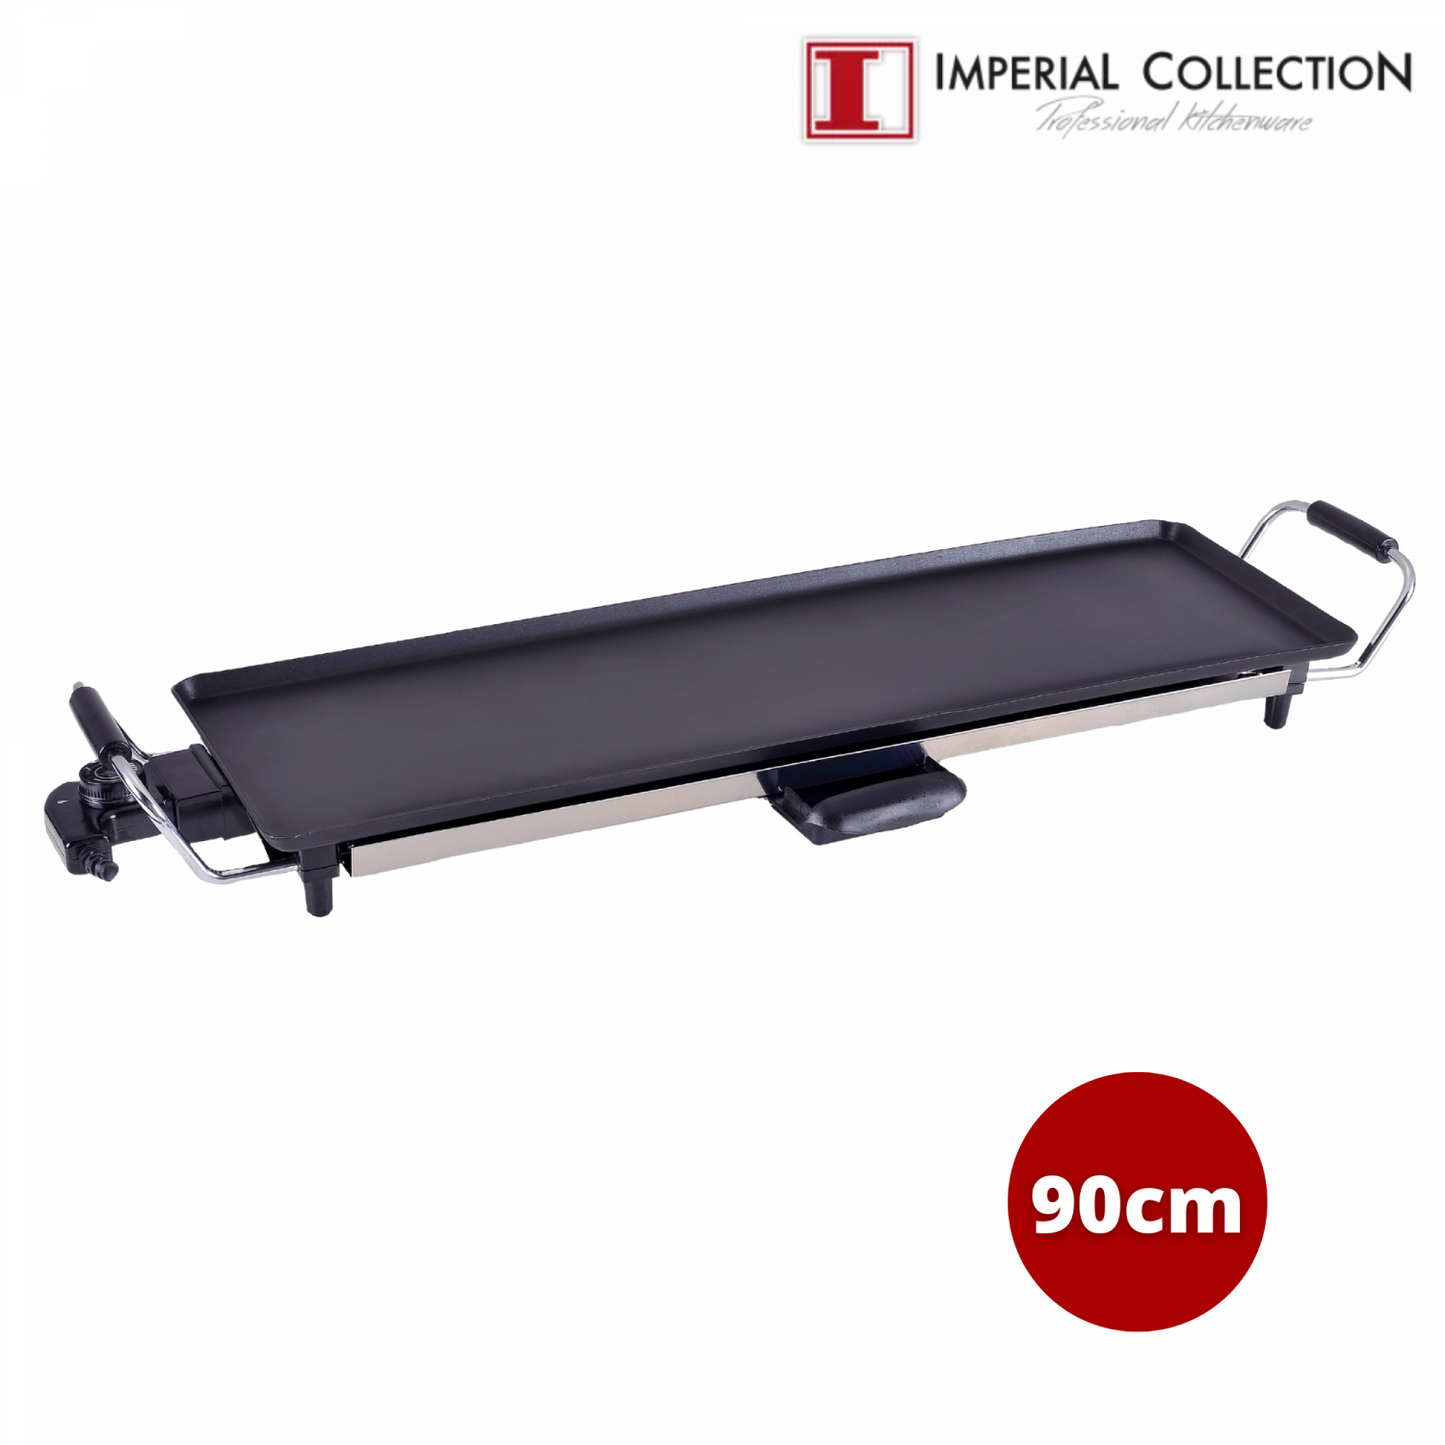 Imperial Collection 90cm Electric Multi-Grill